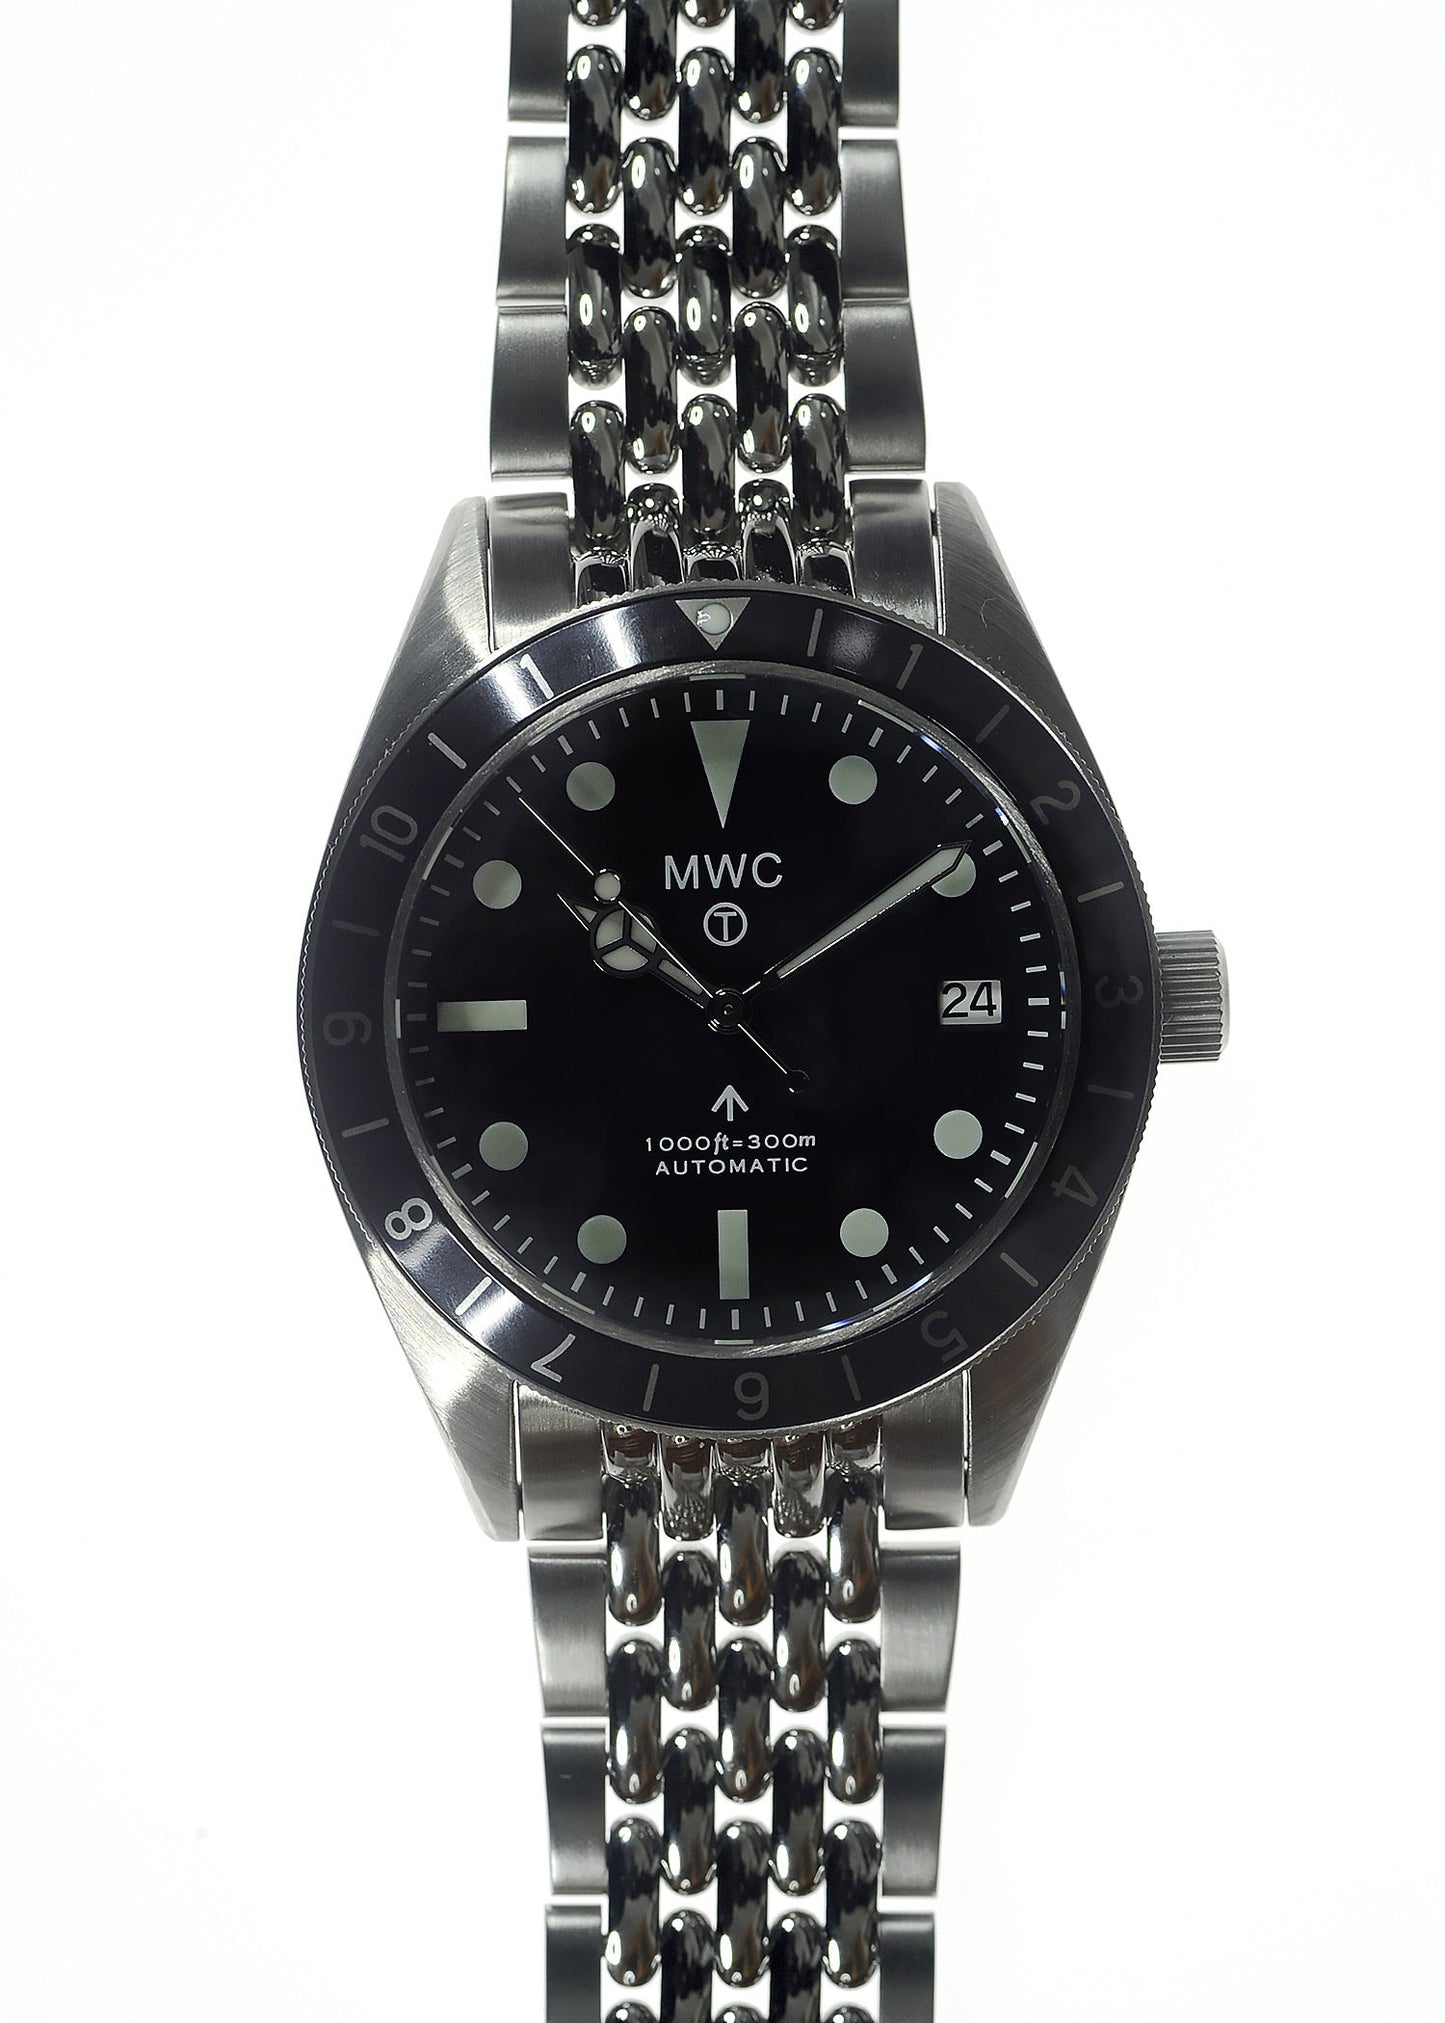 MWC Classic 1960s Pattern Automatic Dual Time Zone Divers Pattern Watch with Sapphire Crystal on a Matching Steel Bracelet